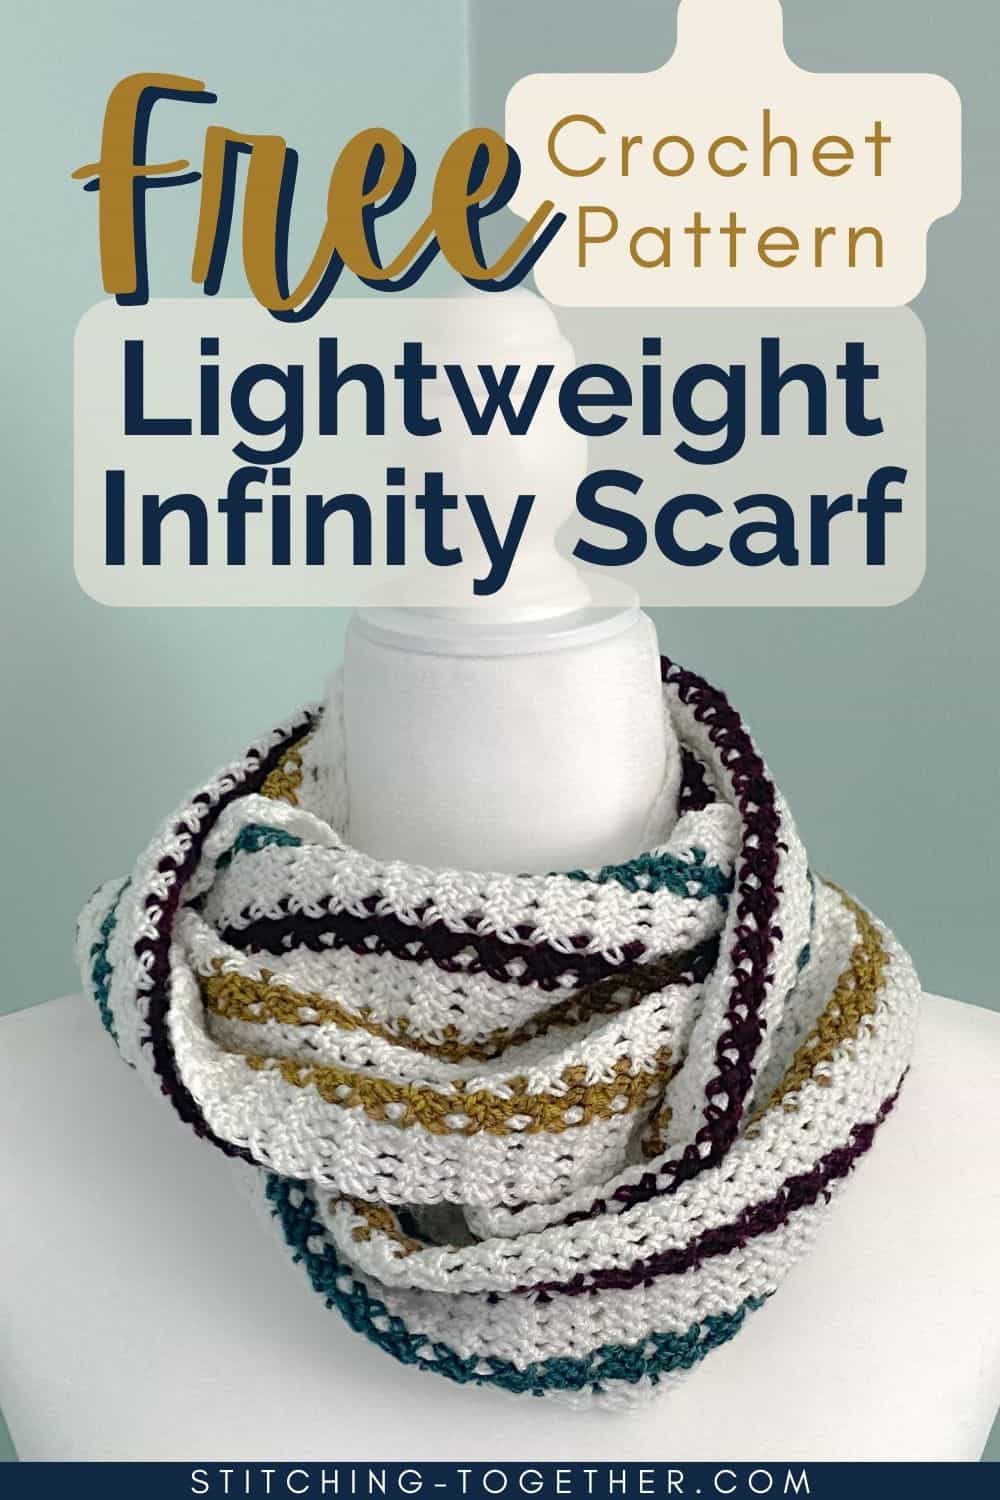 graphic reading "free crochet pattern lightweight infinity scarf" with an image of the scarf in the background